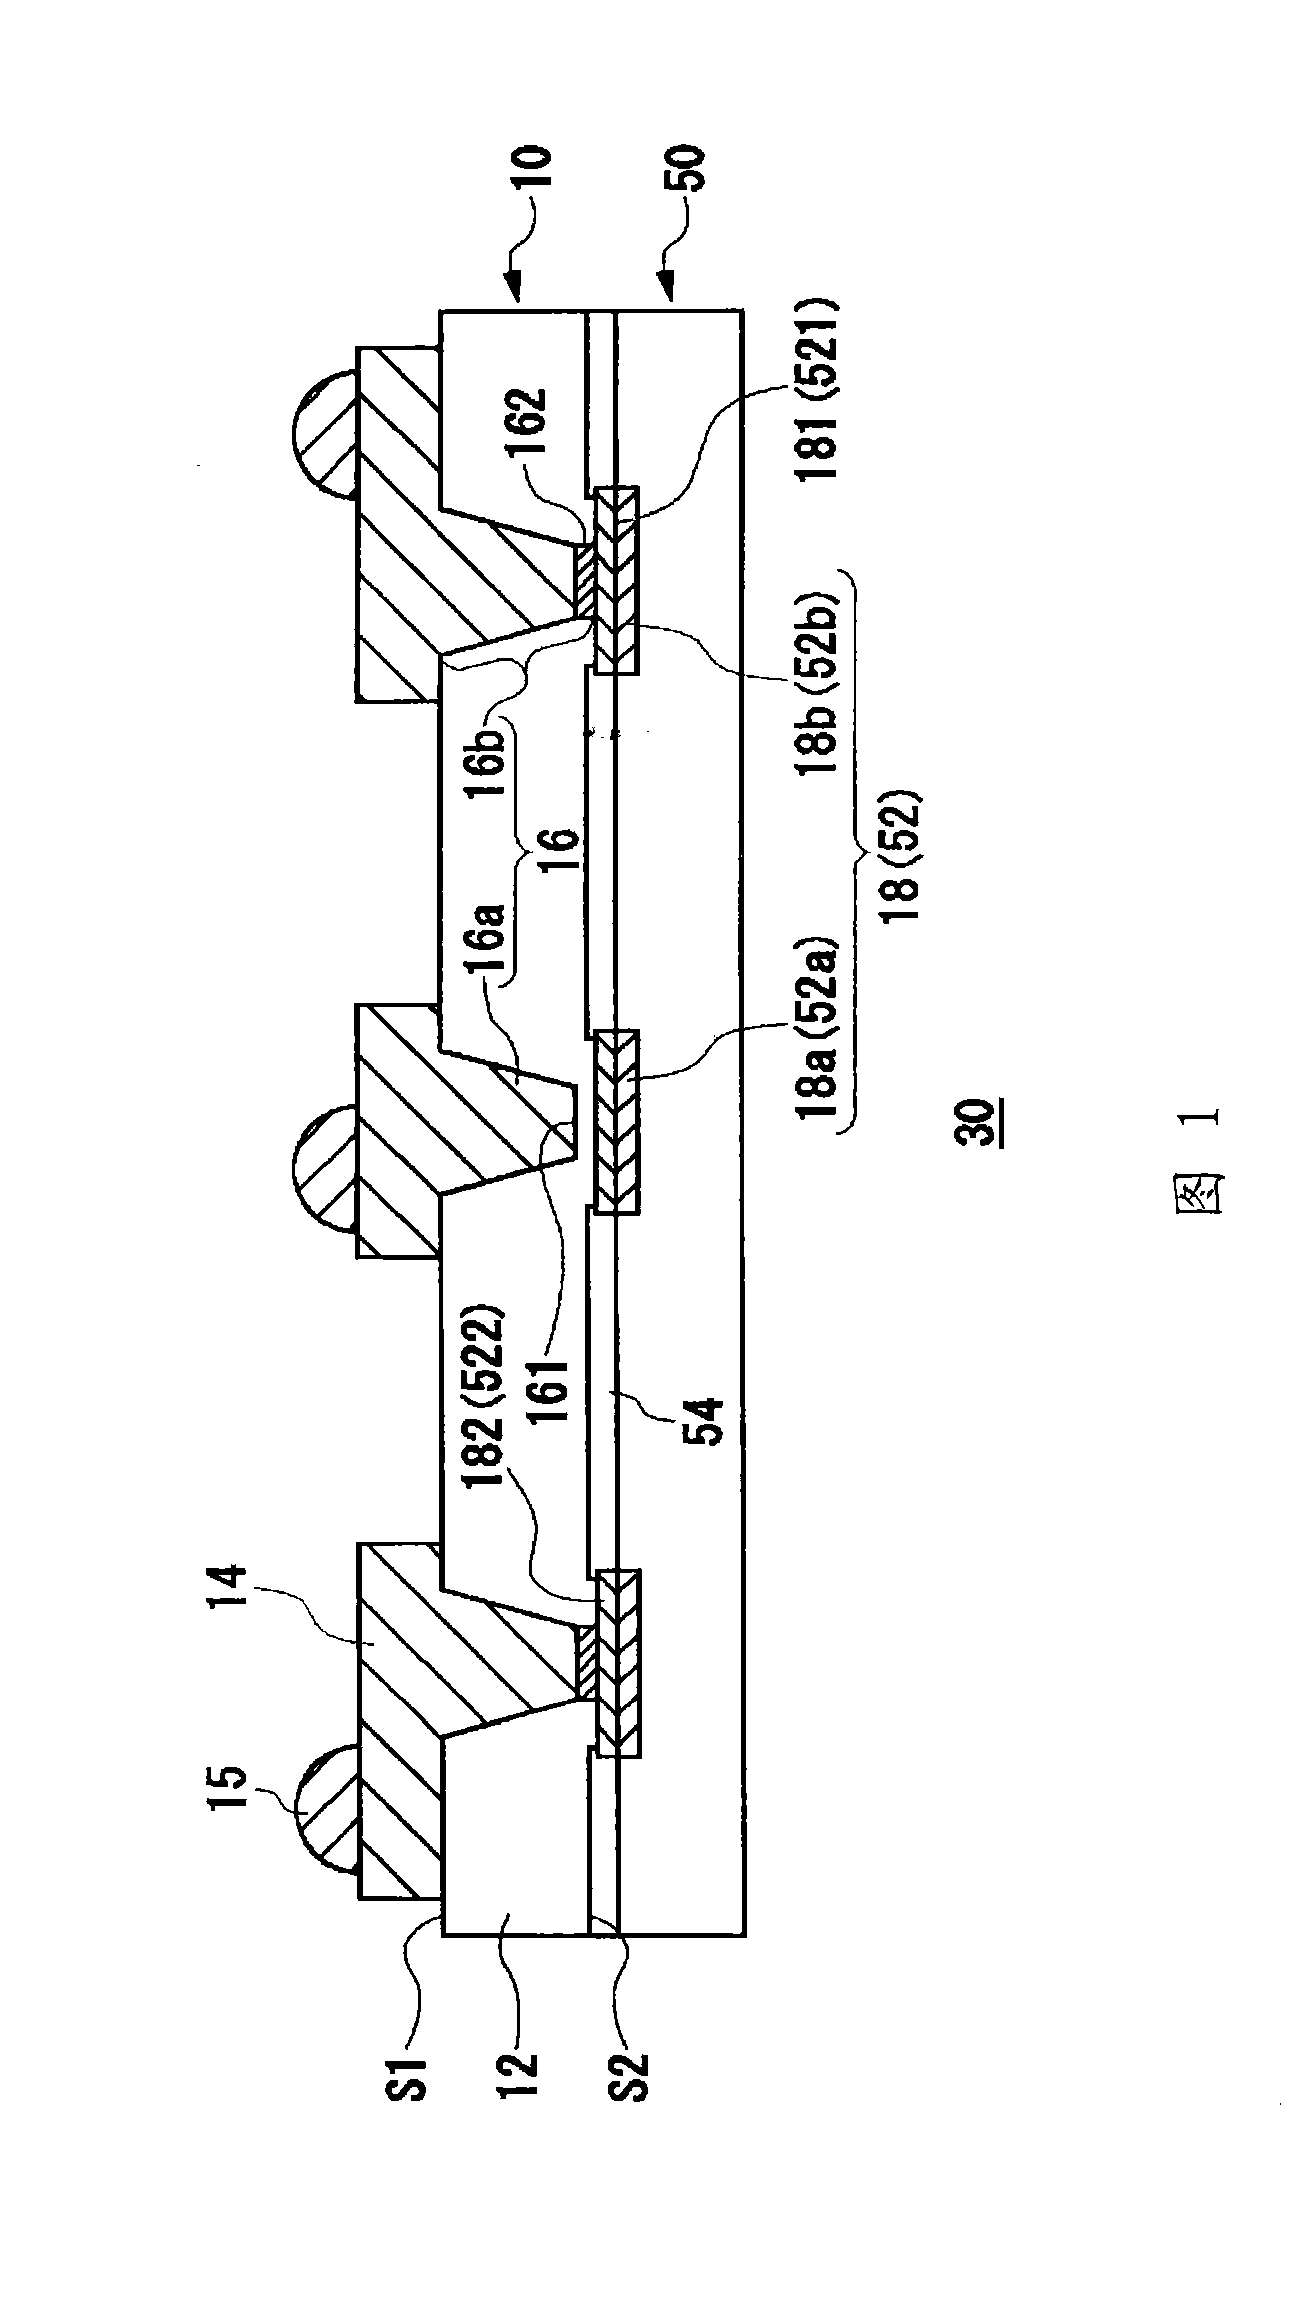 Substrate for mounting device, semiconductor module and method for producing the same, and portable apparatus